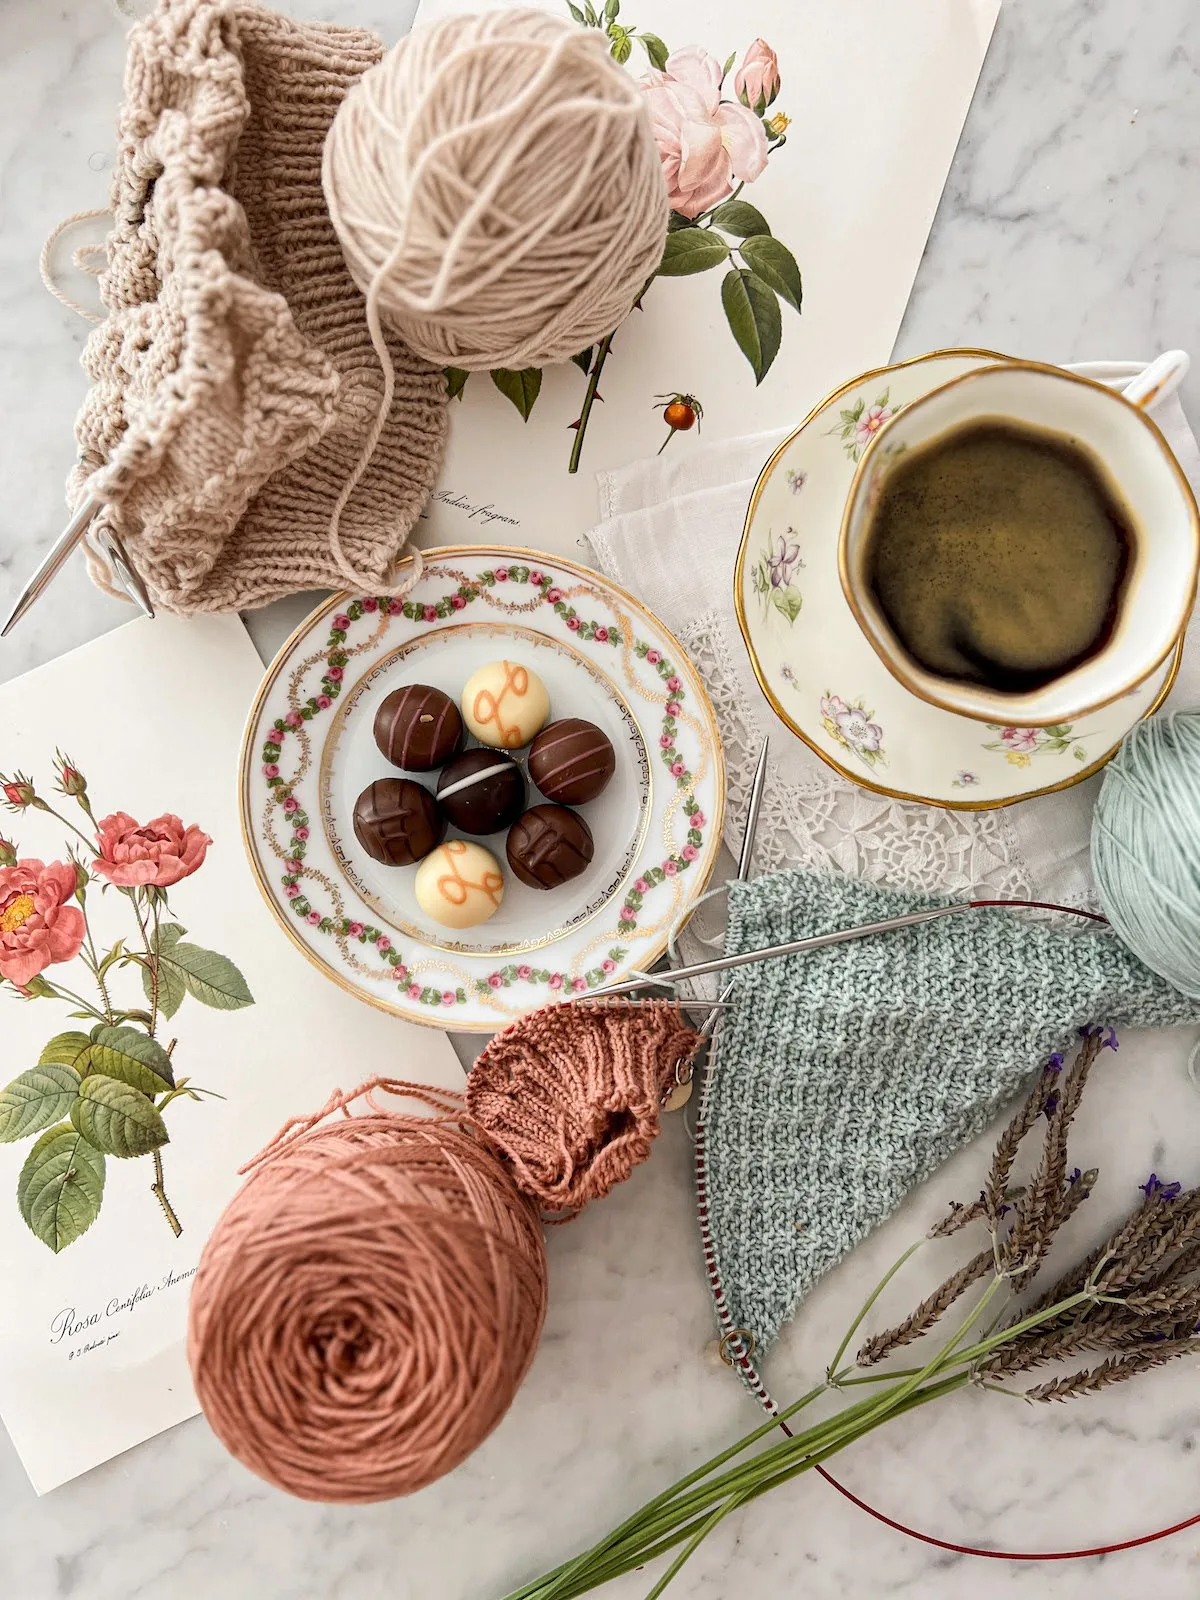 A top-down photo of three knitting projects in progress, all on circular needles. They are a tan hat, a dark pink sock, and a mint shawl. They're surrounded by vintage botanical prints, an ornate plate with chocolate bonbonbs on it, and a pastel teacup full of espresso.